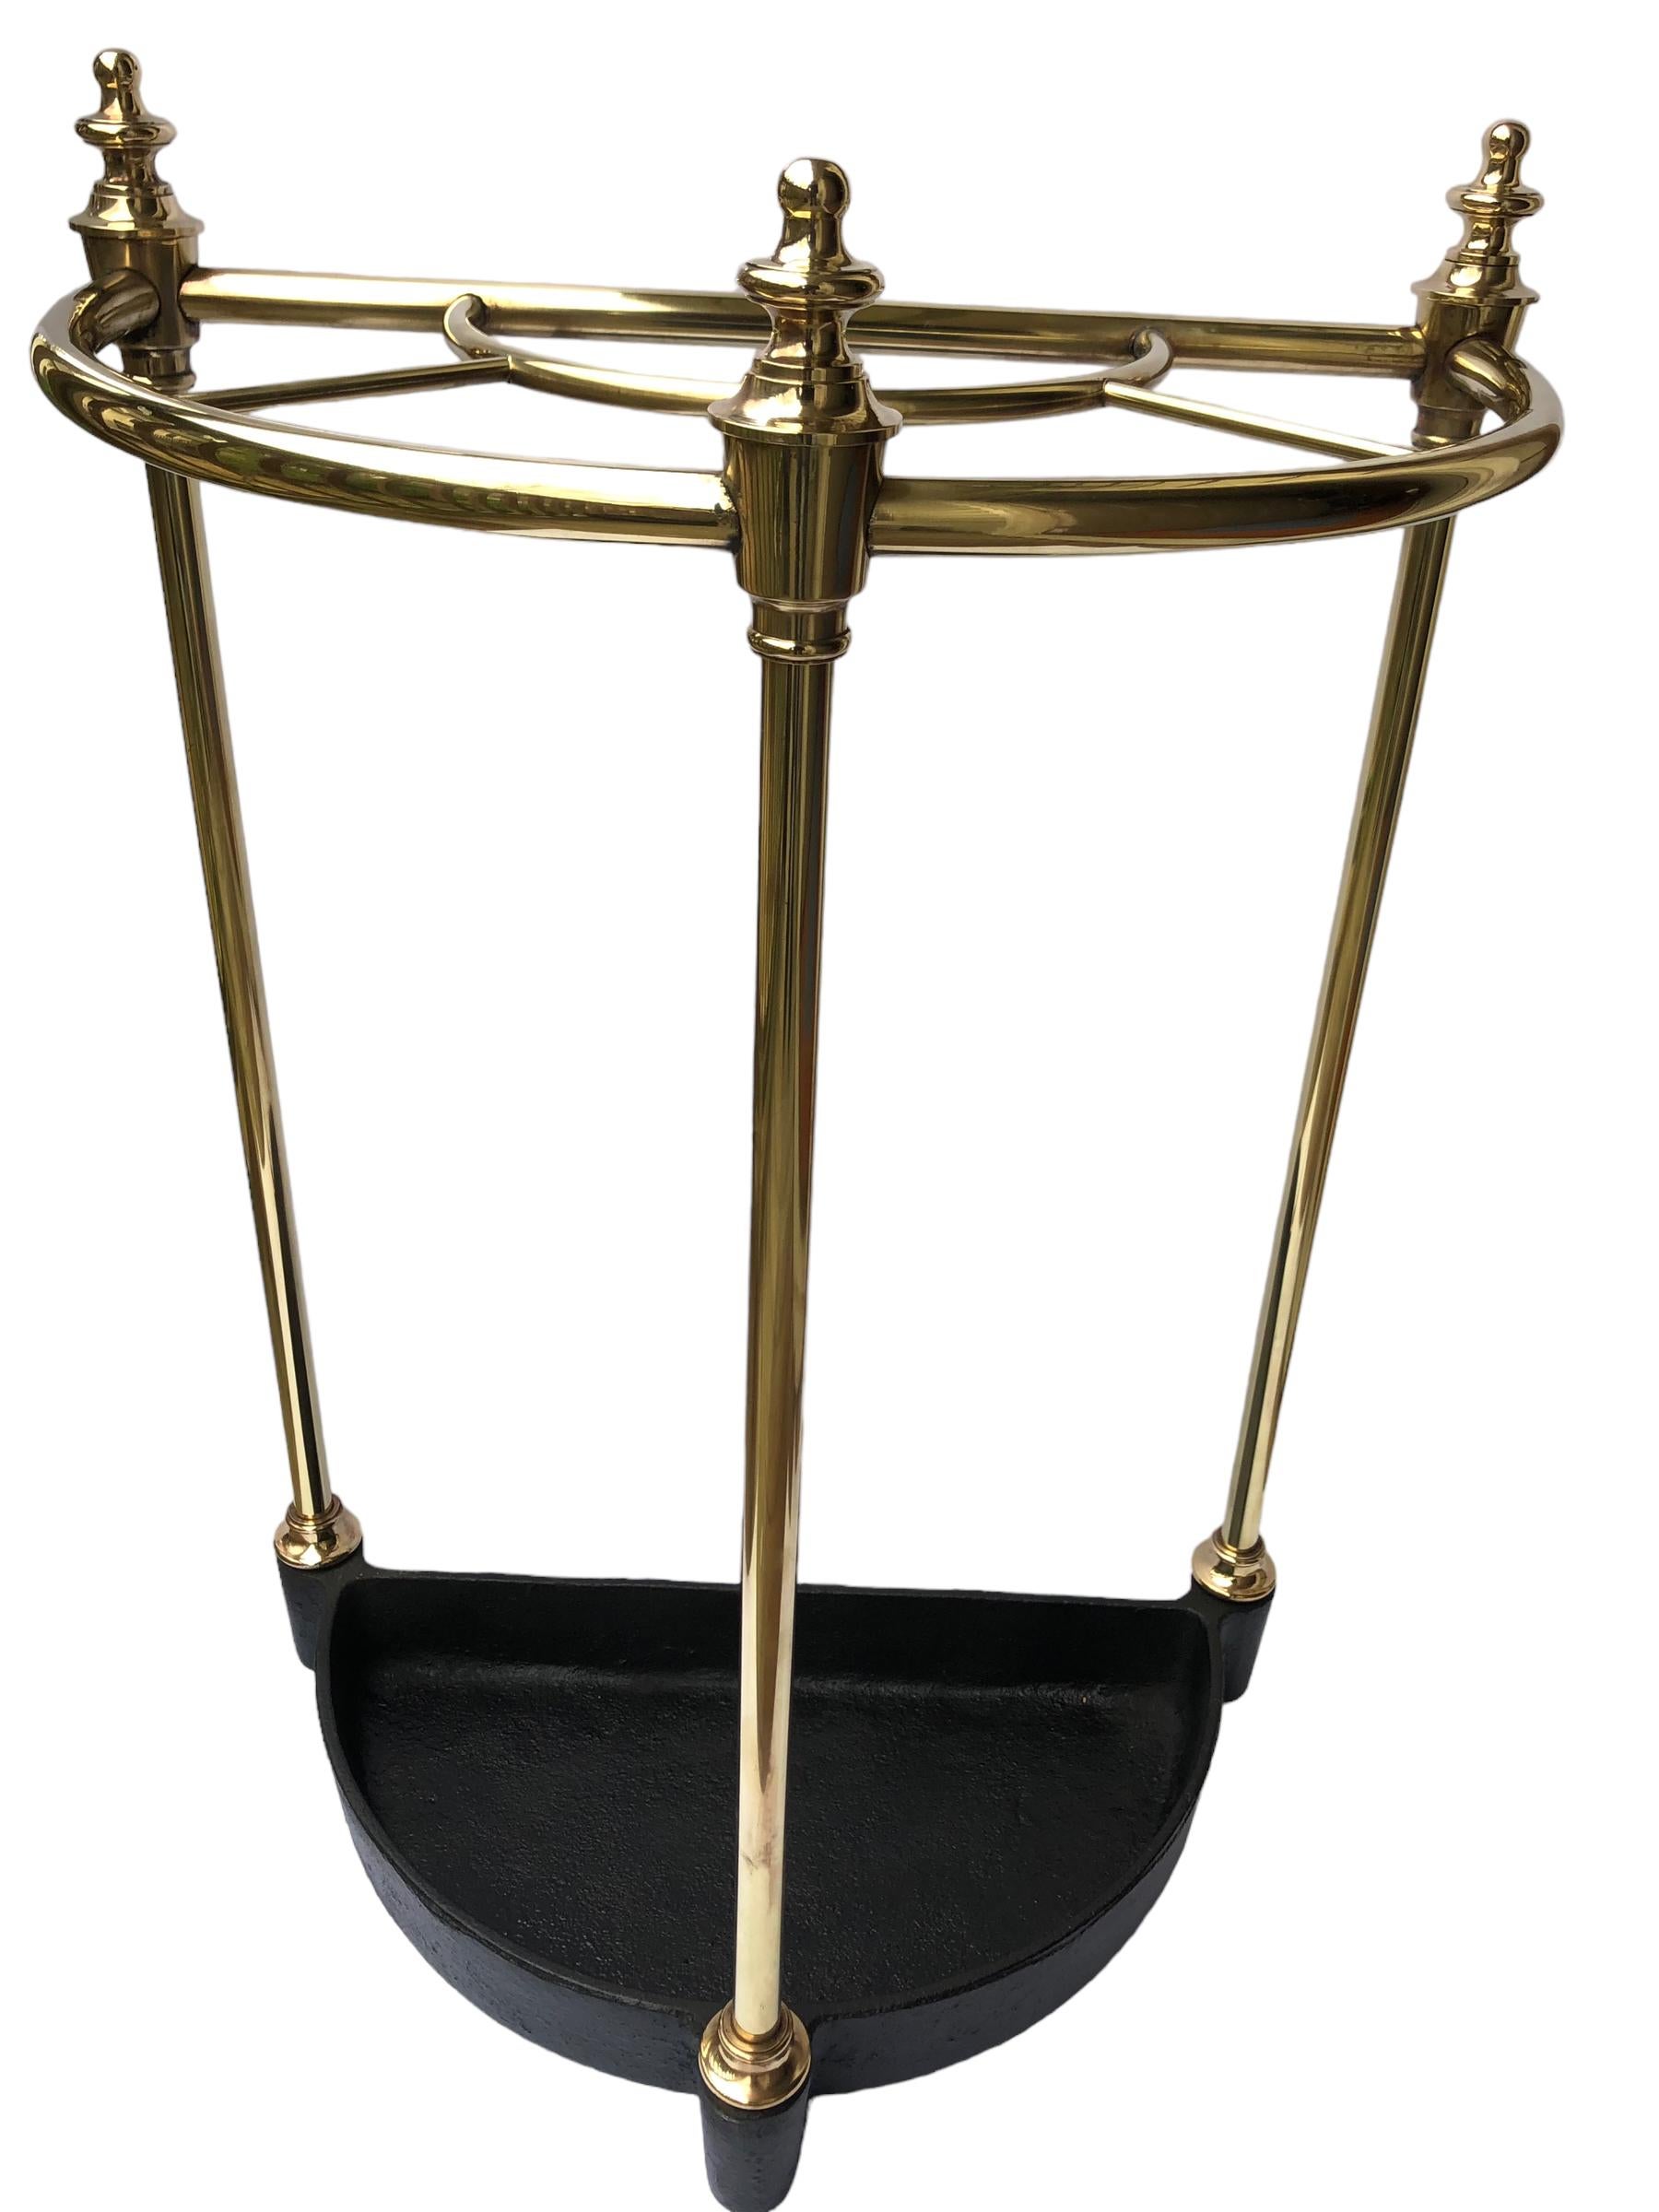 Vintage solid brass English brass and cast iron umbrella or stick stand. Half round construction with five slots for holding your umbrellas or walking stick.